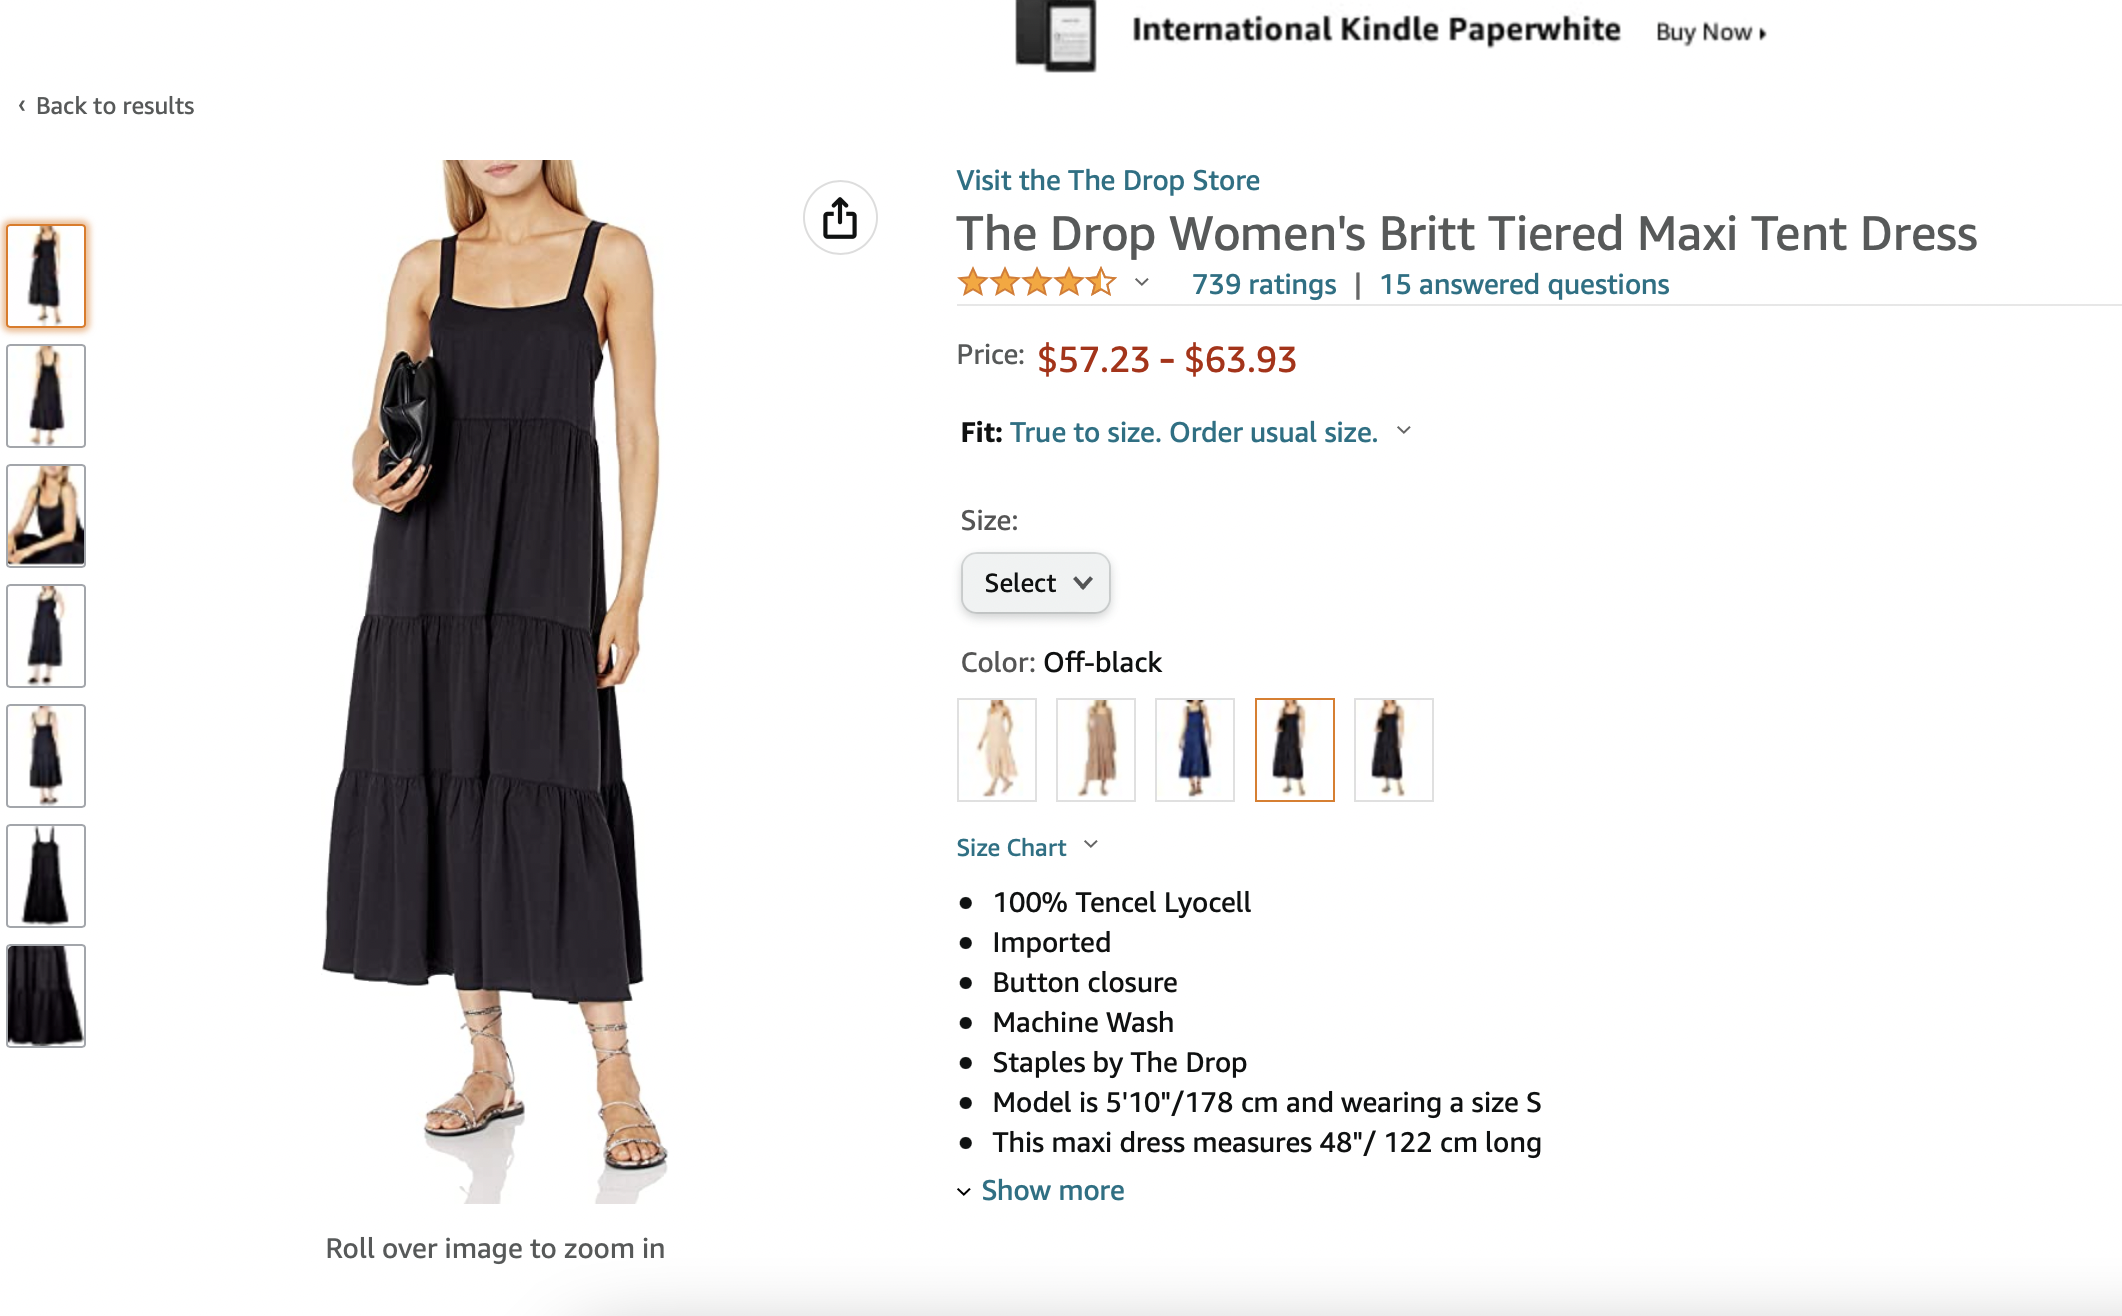 How to sell clothes on Amazon in 2022?